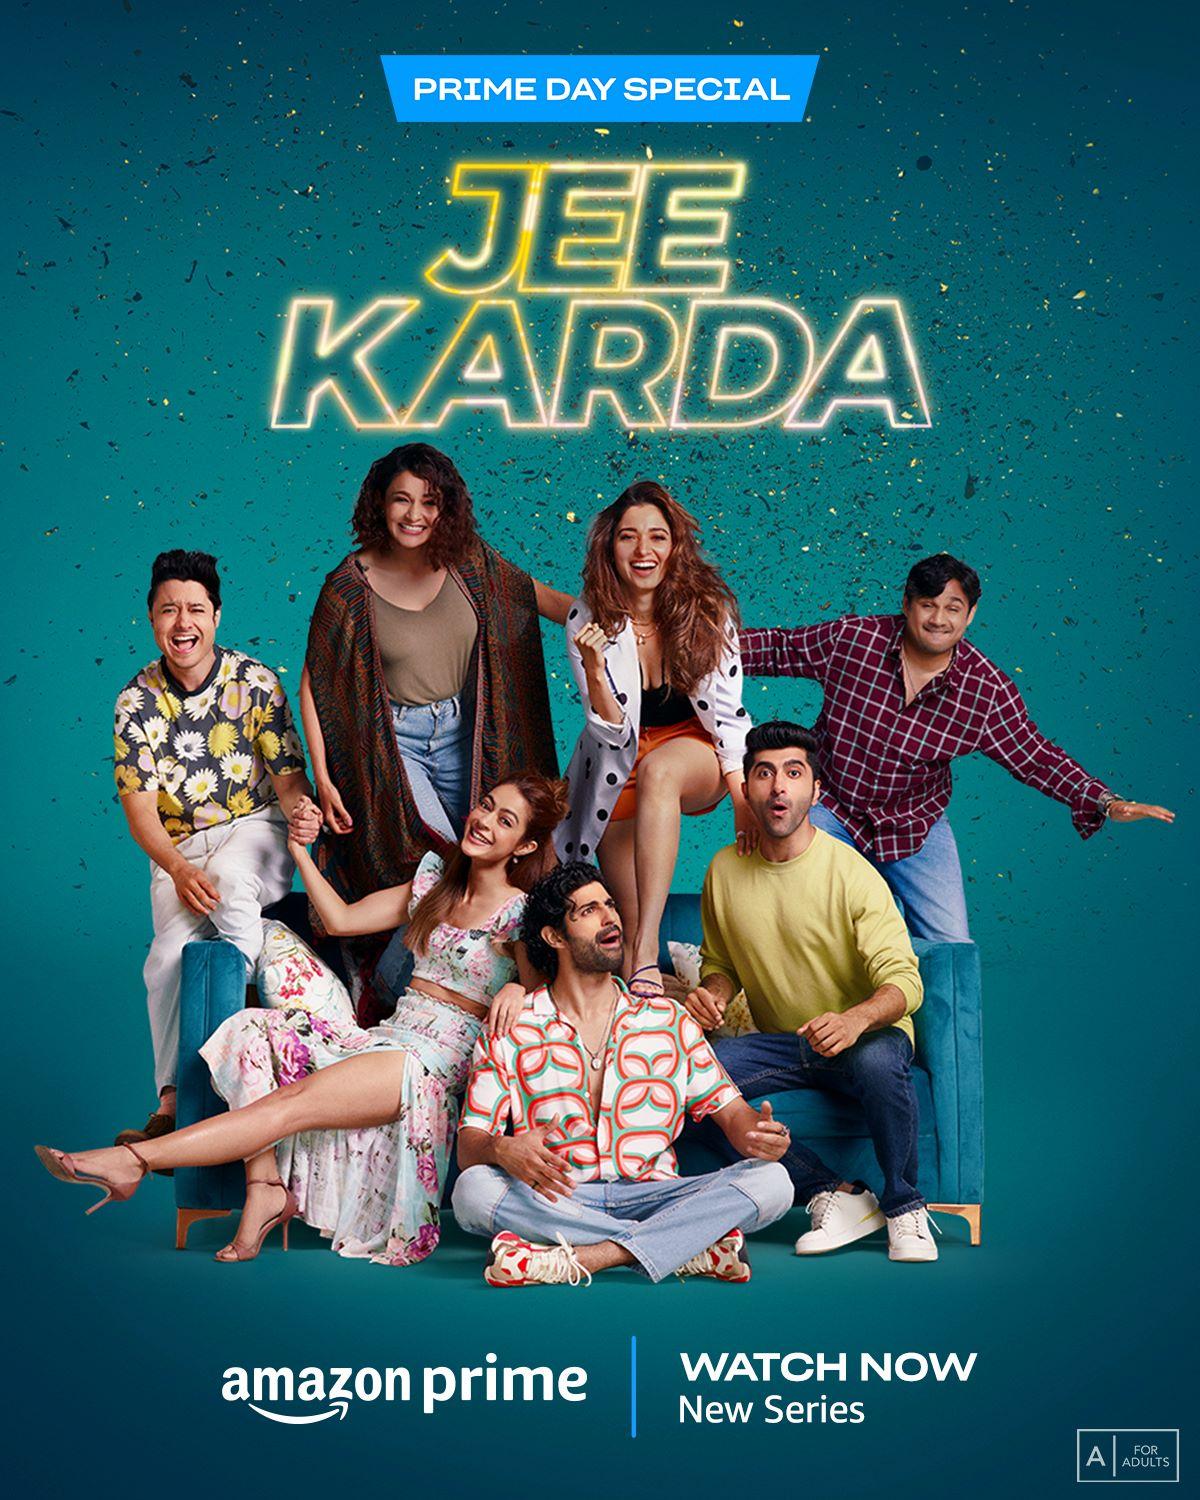 Jee Karda to watch ‘Jee Karda’ and experience the enthralling story of seven friends who realise life in their 30s is not what they imagined. This story is one to take you on an emotional rollercoaster